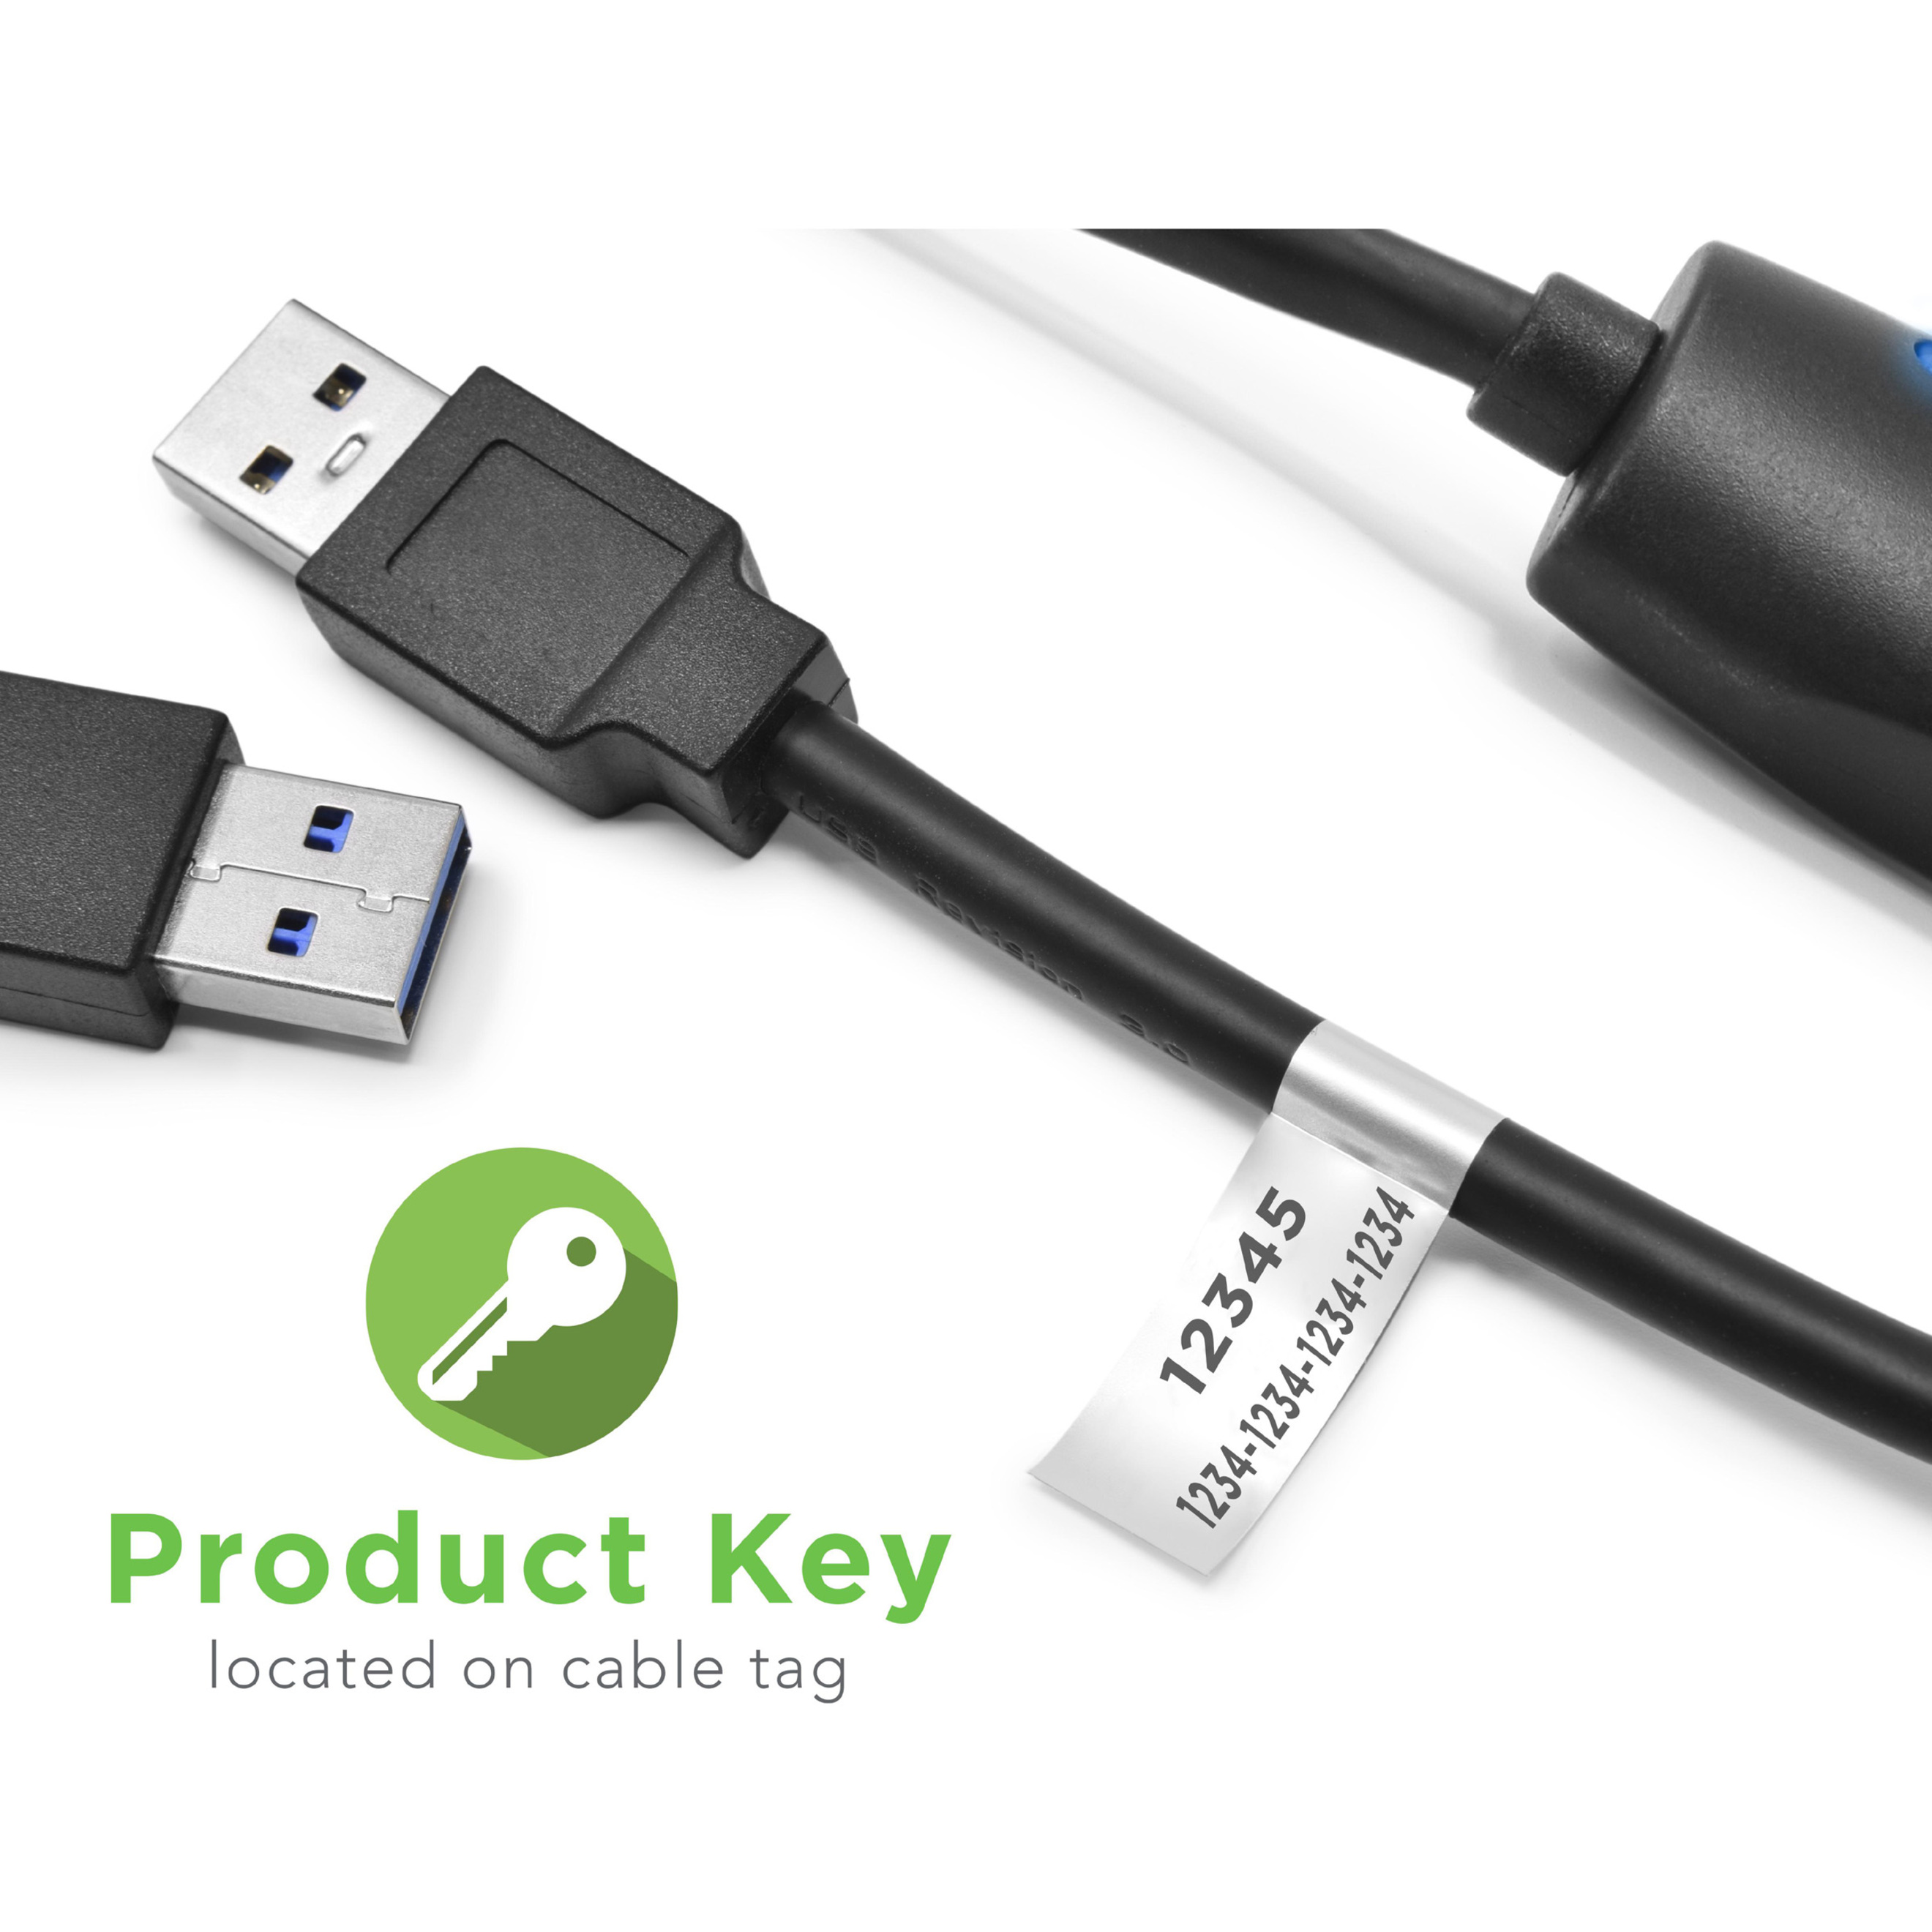 Plugable USB 3.0 Transfer Cable, Unlimited Use, Transfer Data Between 2 Windows PC's, Compatible with Windows 11, 10, 8.1, 8, 7, Vista, XP, Bravura Easy Computer Sync Software Included - image 2 of 5